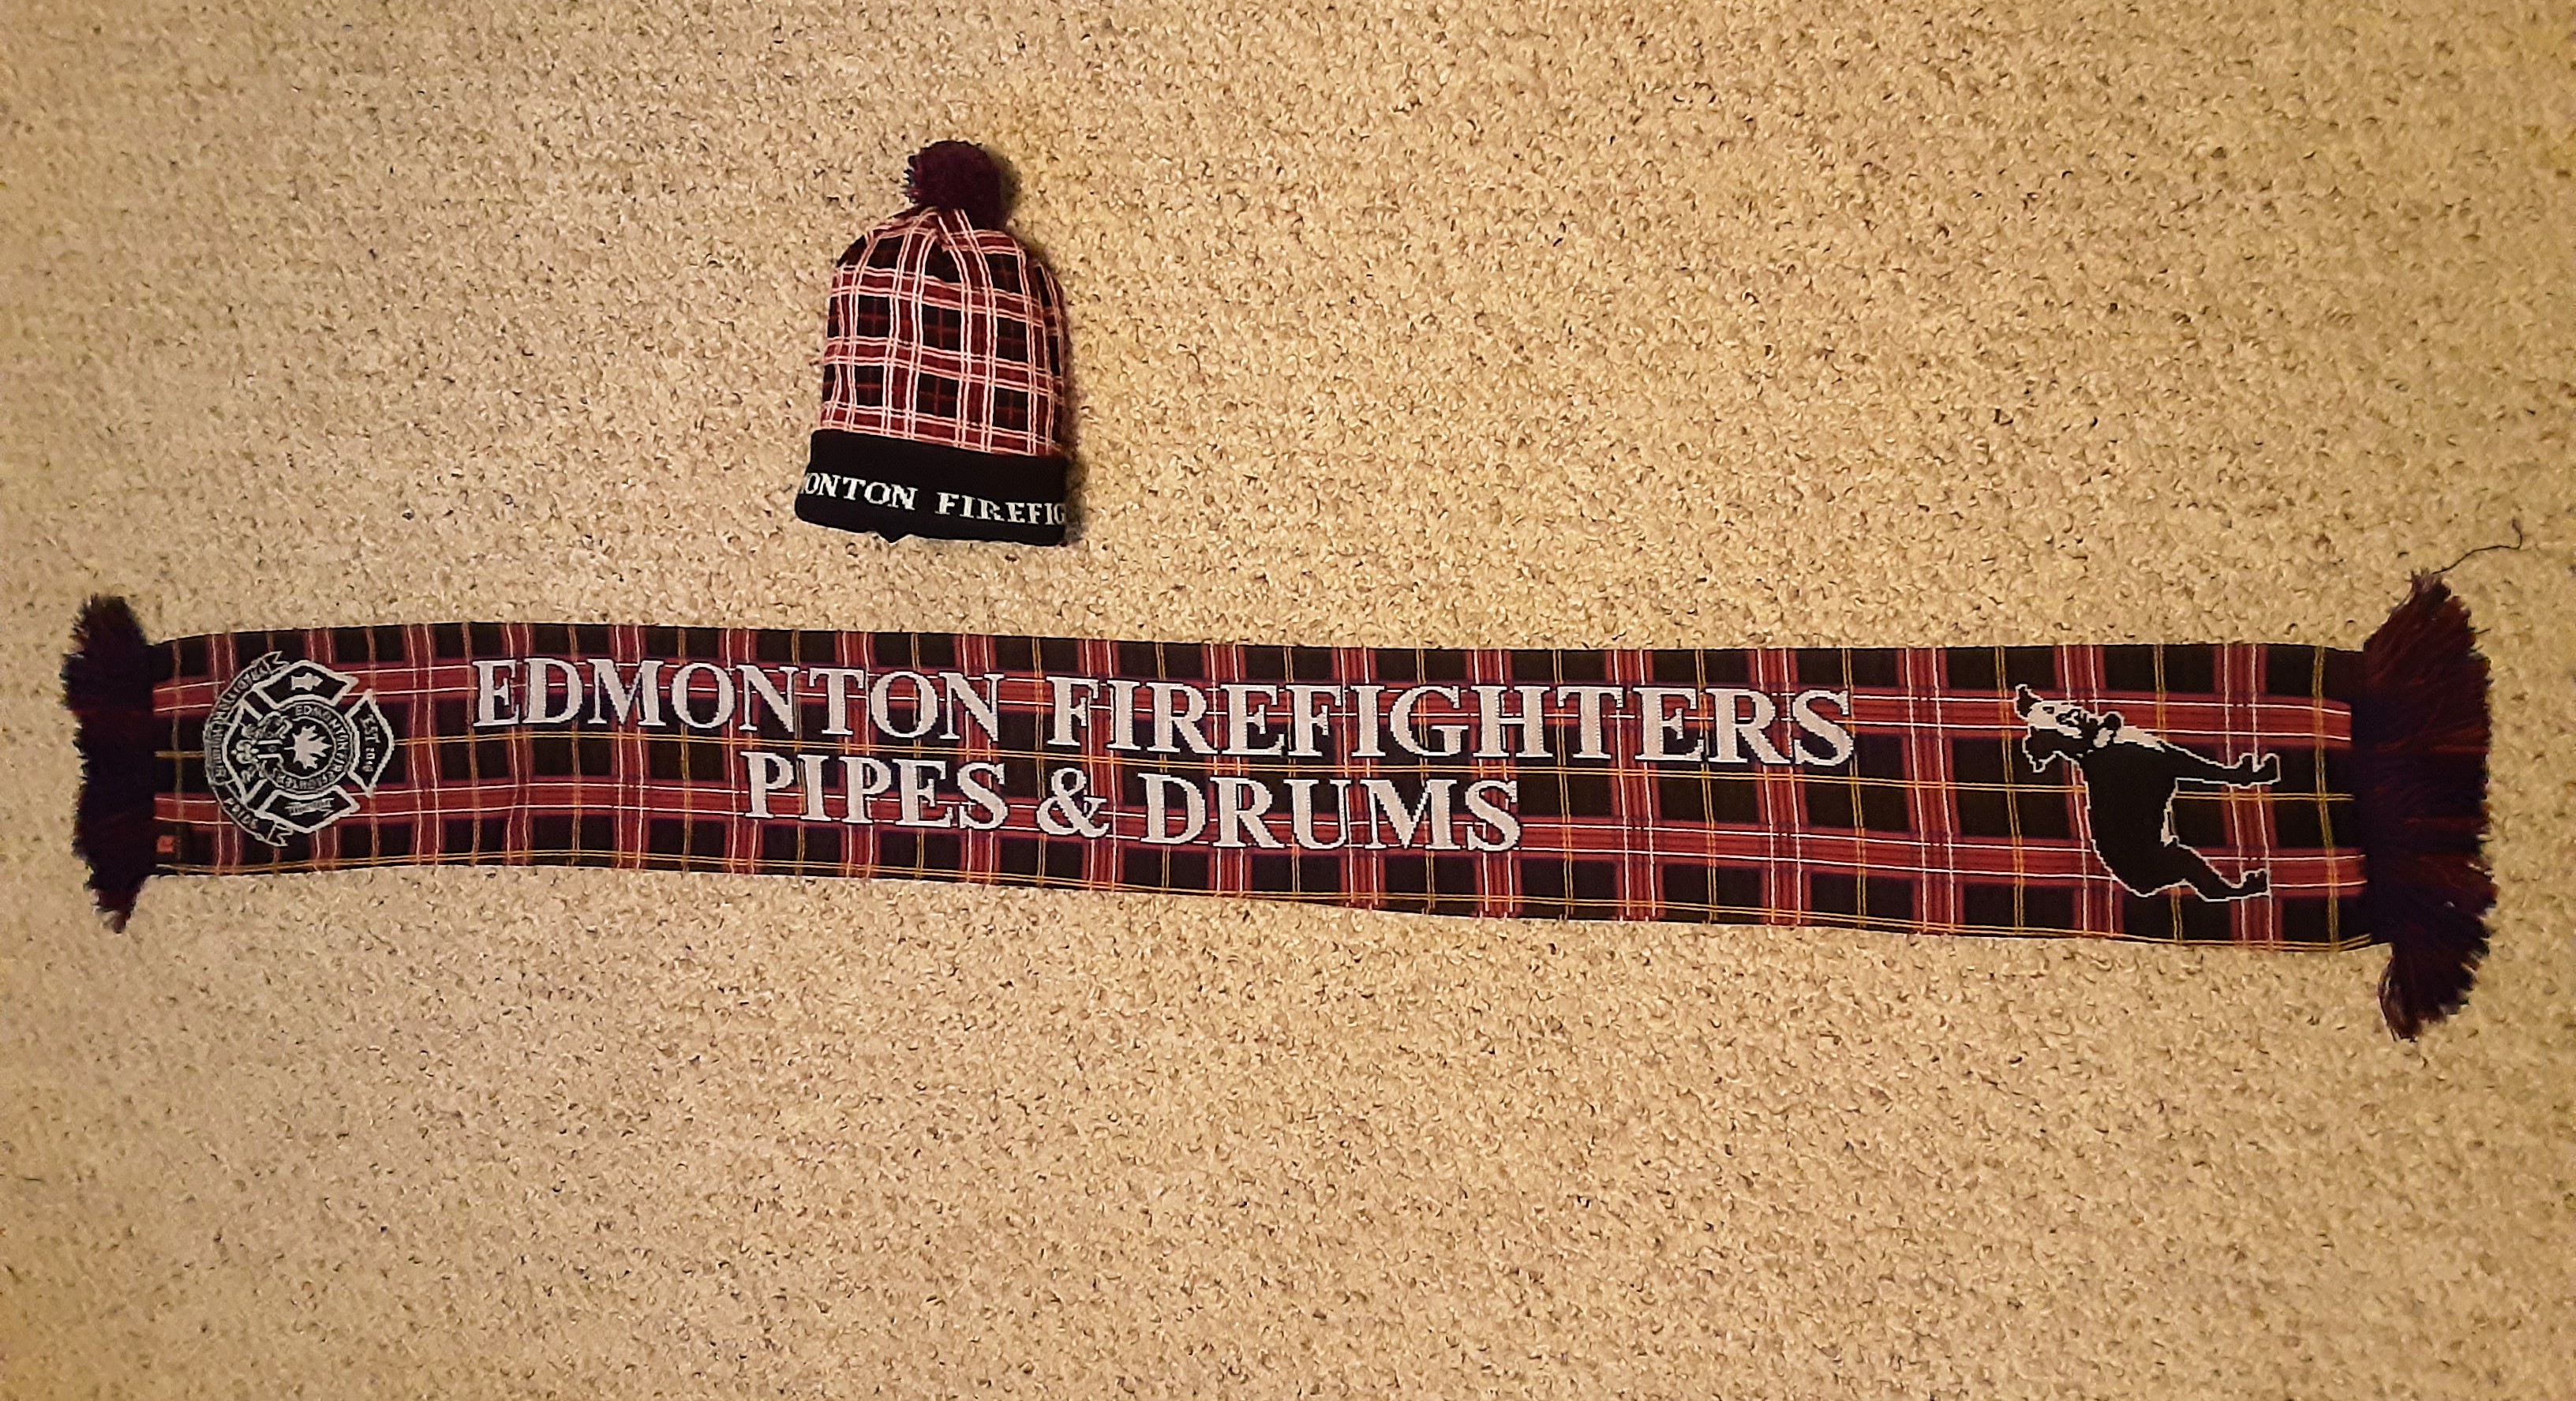 The Edmonton Firefighters Piping and Drumming Society is now selling Toques and Scarves as part of our fundraising initiatives.